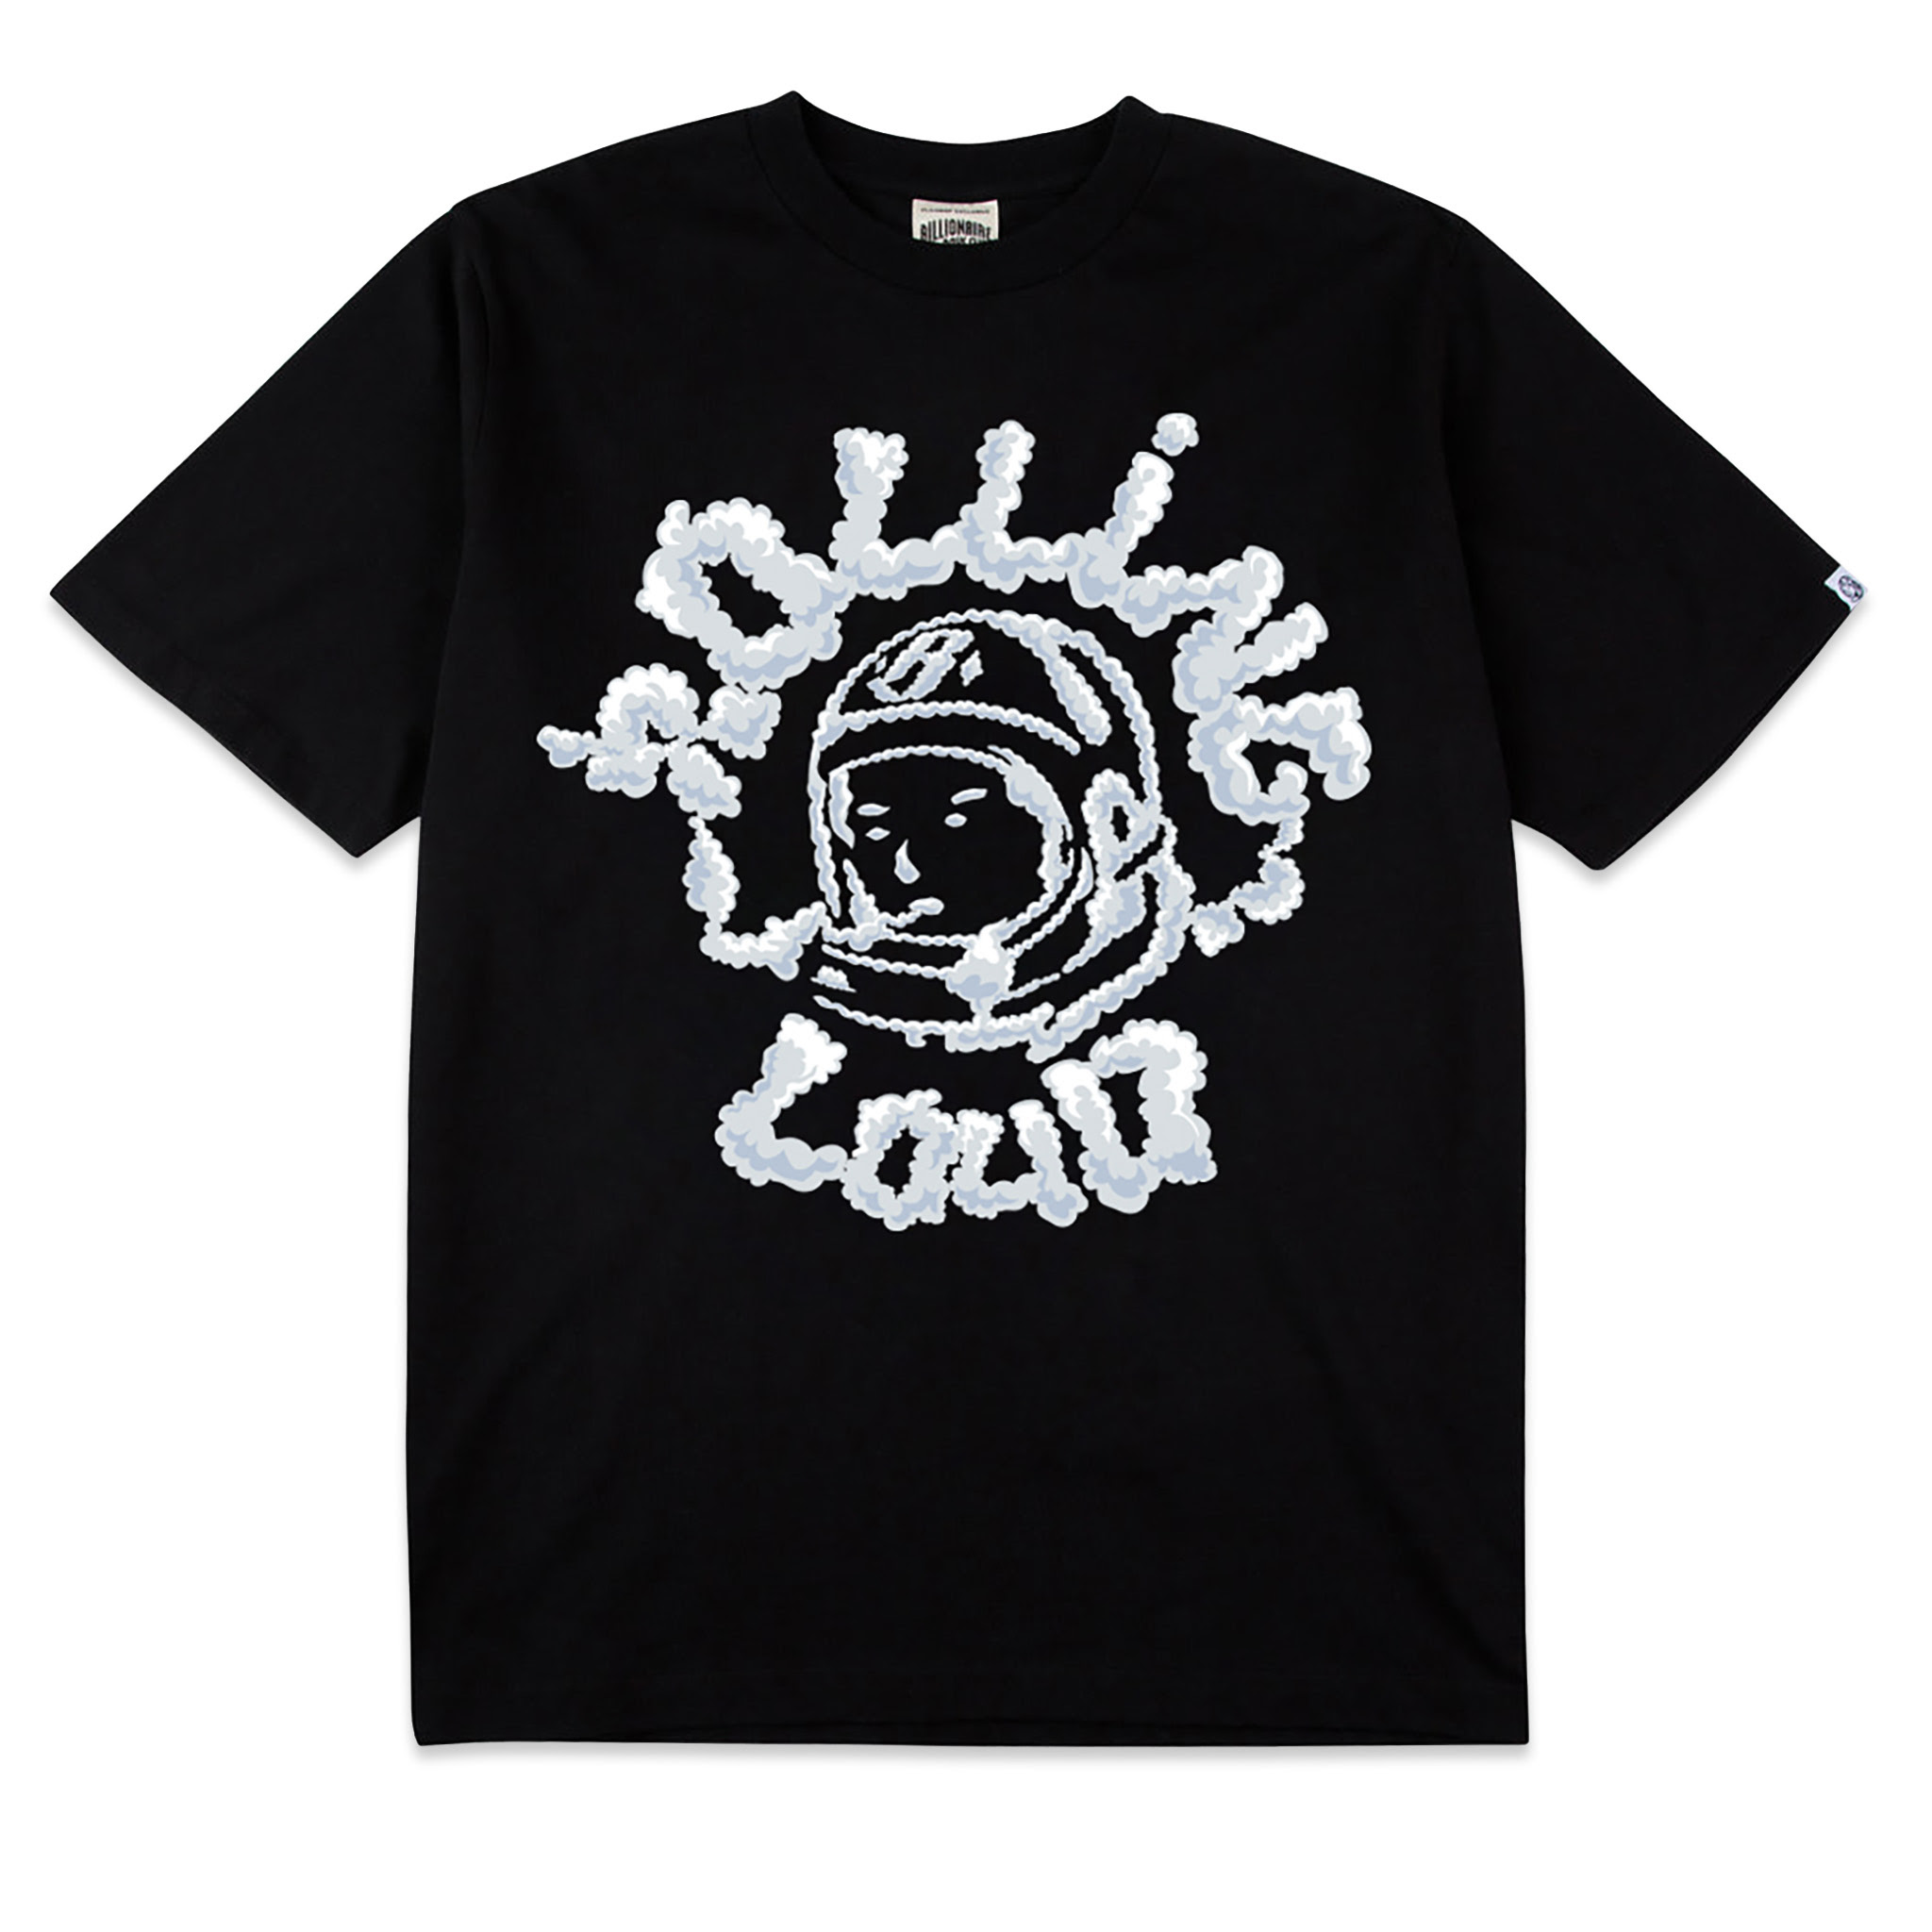 Rolling Loud Announces Merch Collab With Billionaire Boys Club for Miami  2022 - Audible Treats